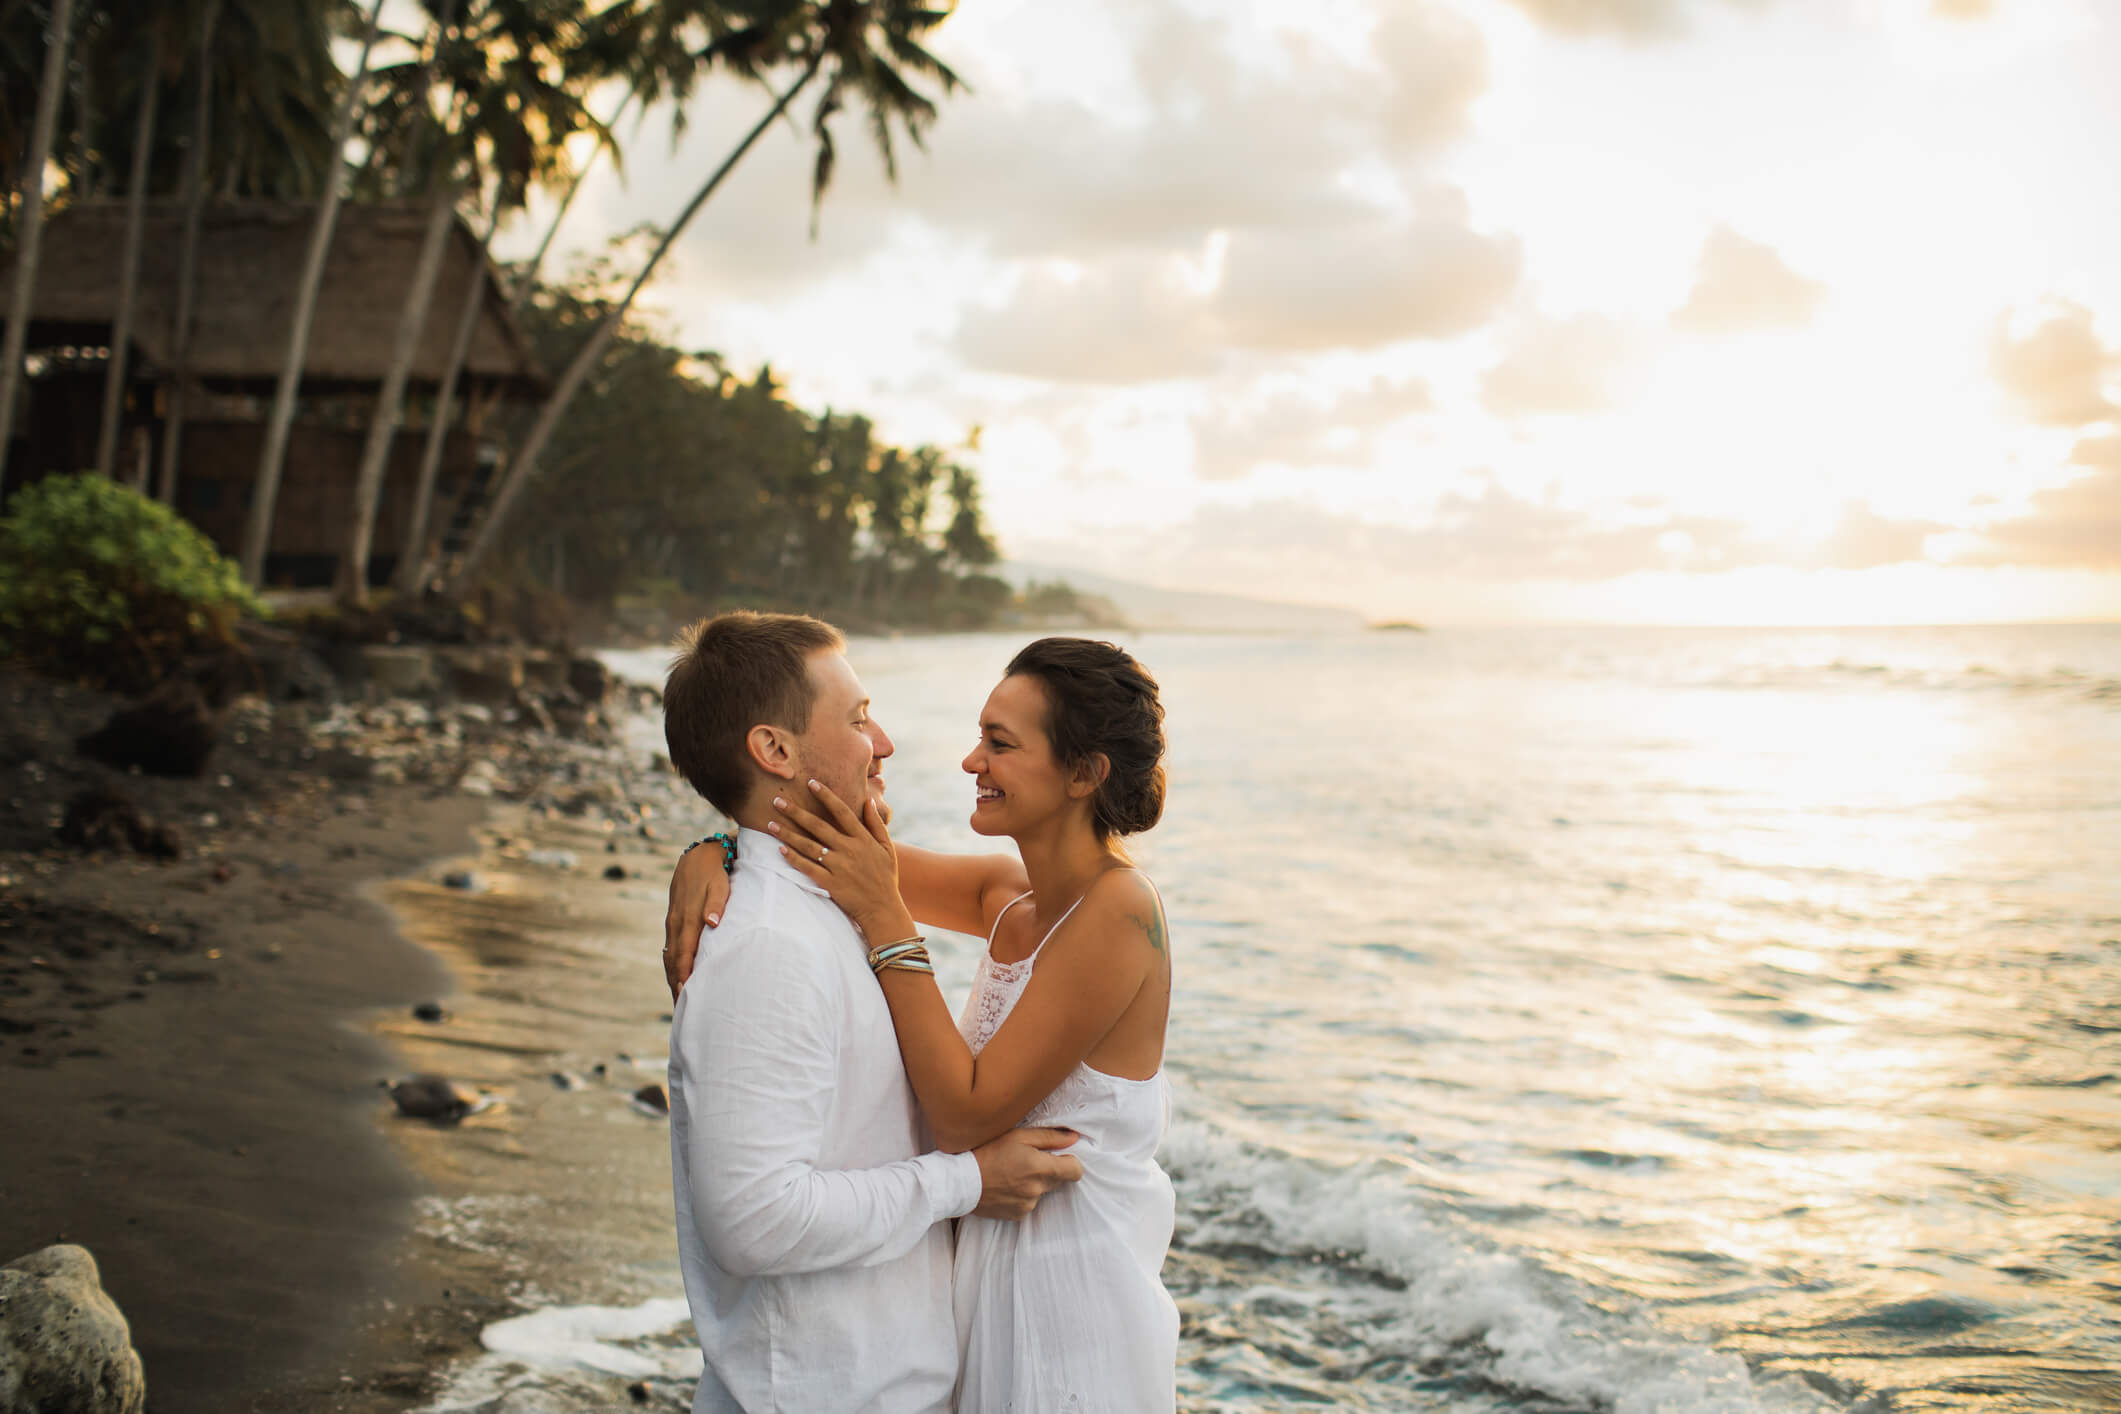 Beach Wedding Ideas You and Your Guests Will Love